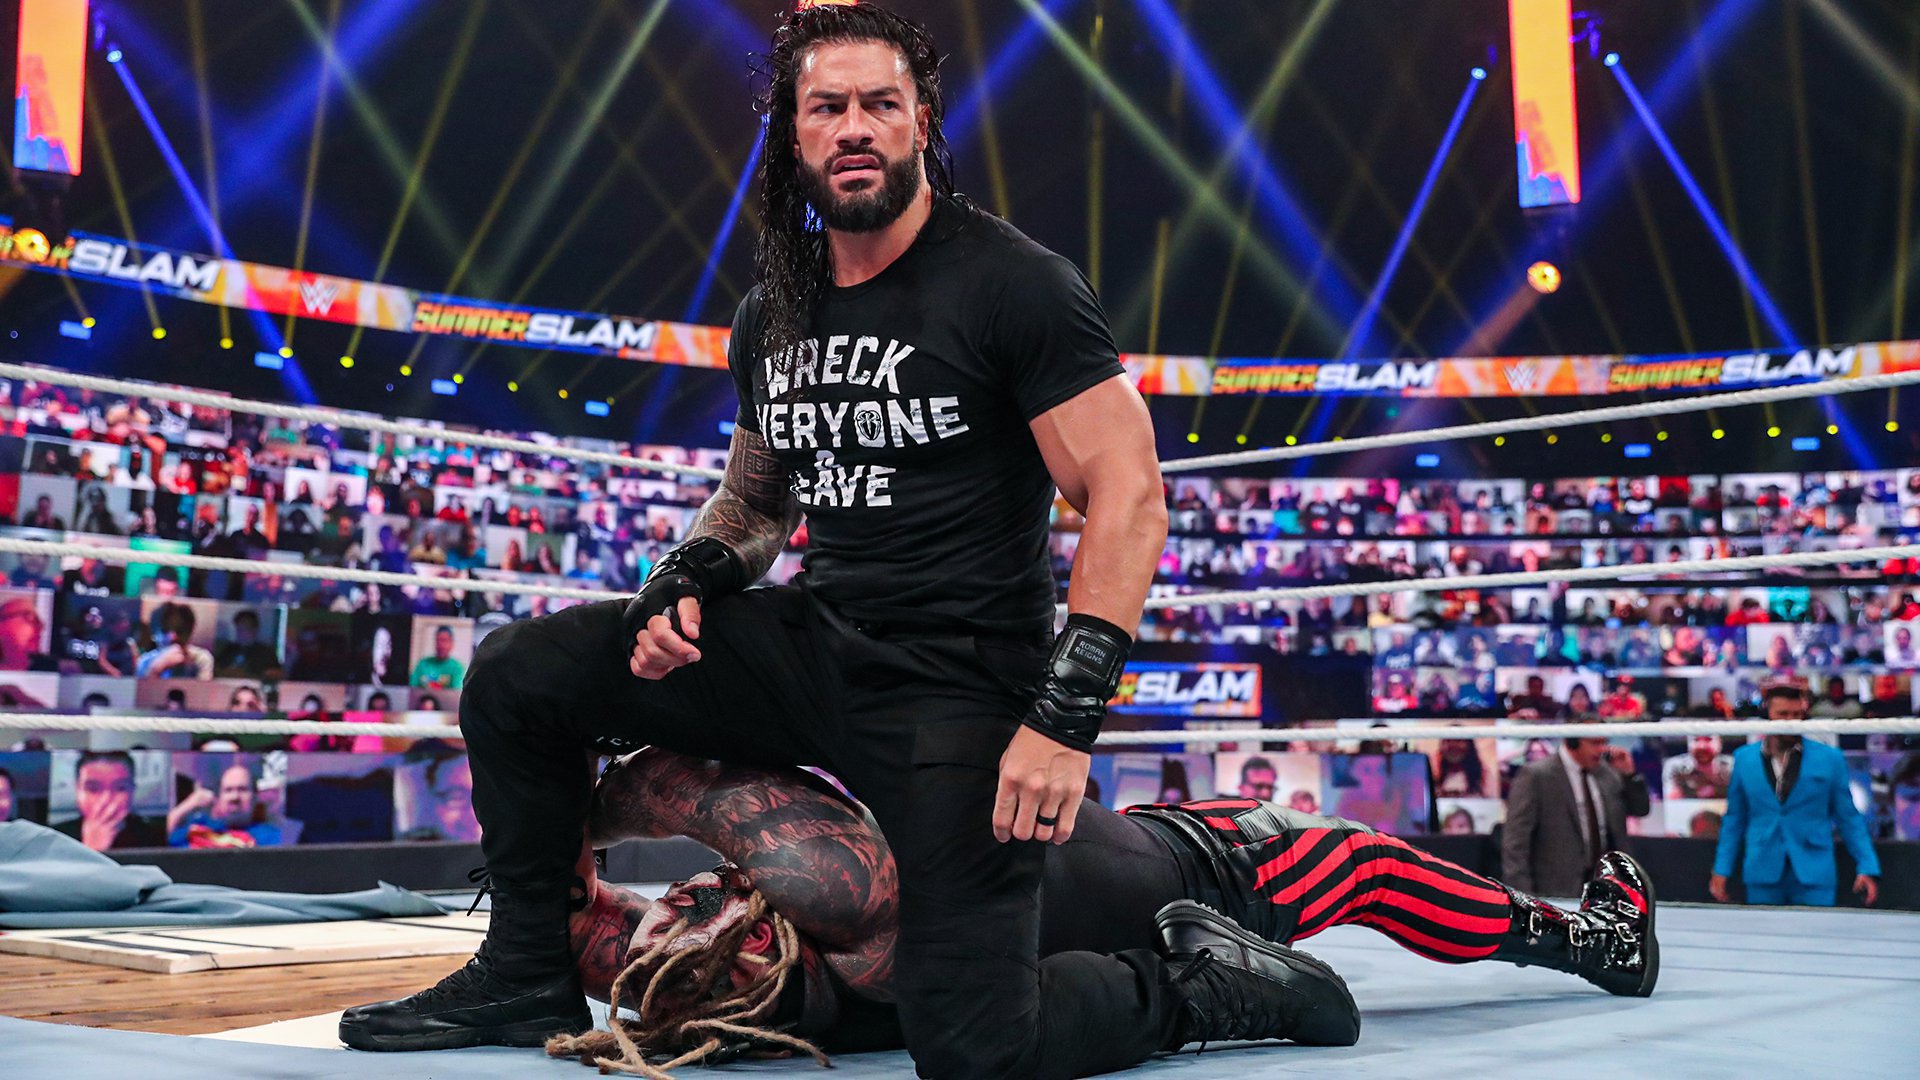 SummerSlam 2020 was held with fans on video. (WWE)